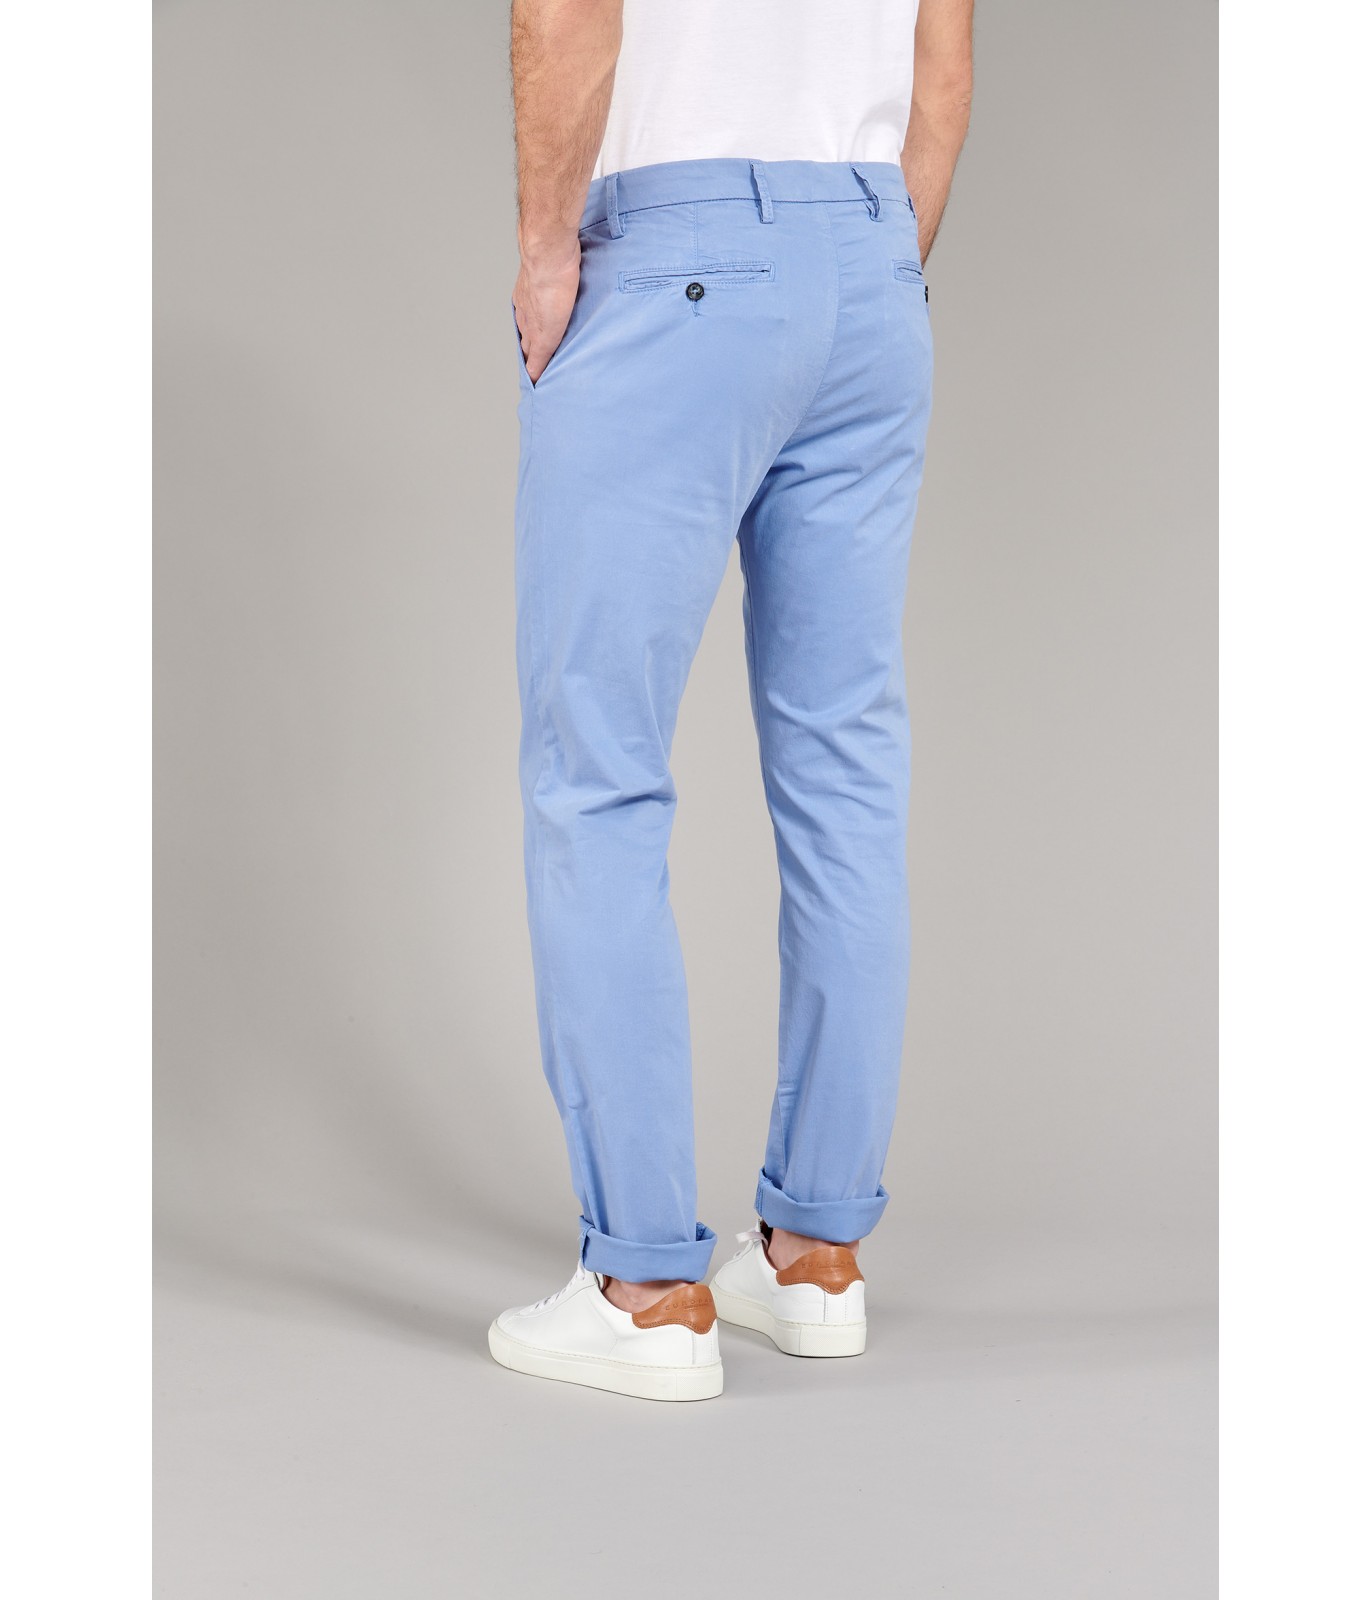 Men's Traditional Fit Comfort-First Knockabout Chino Pants | Lands' End